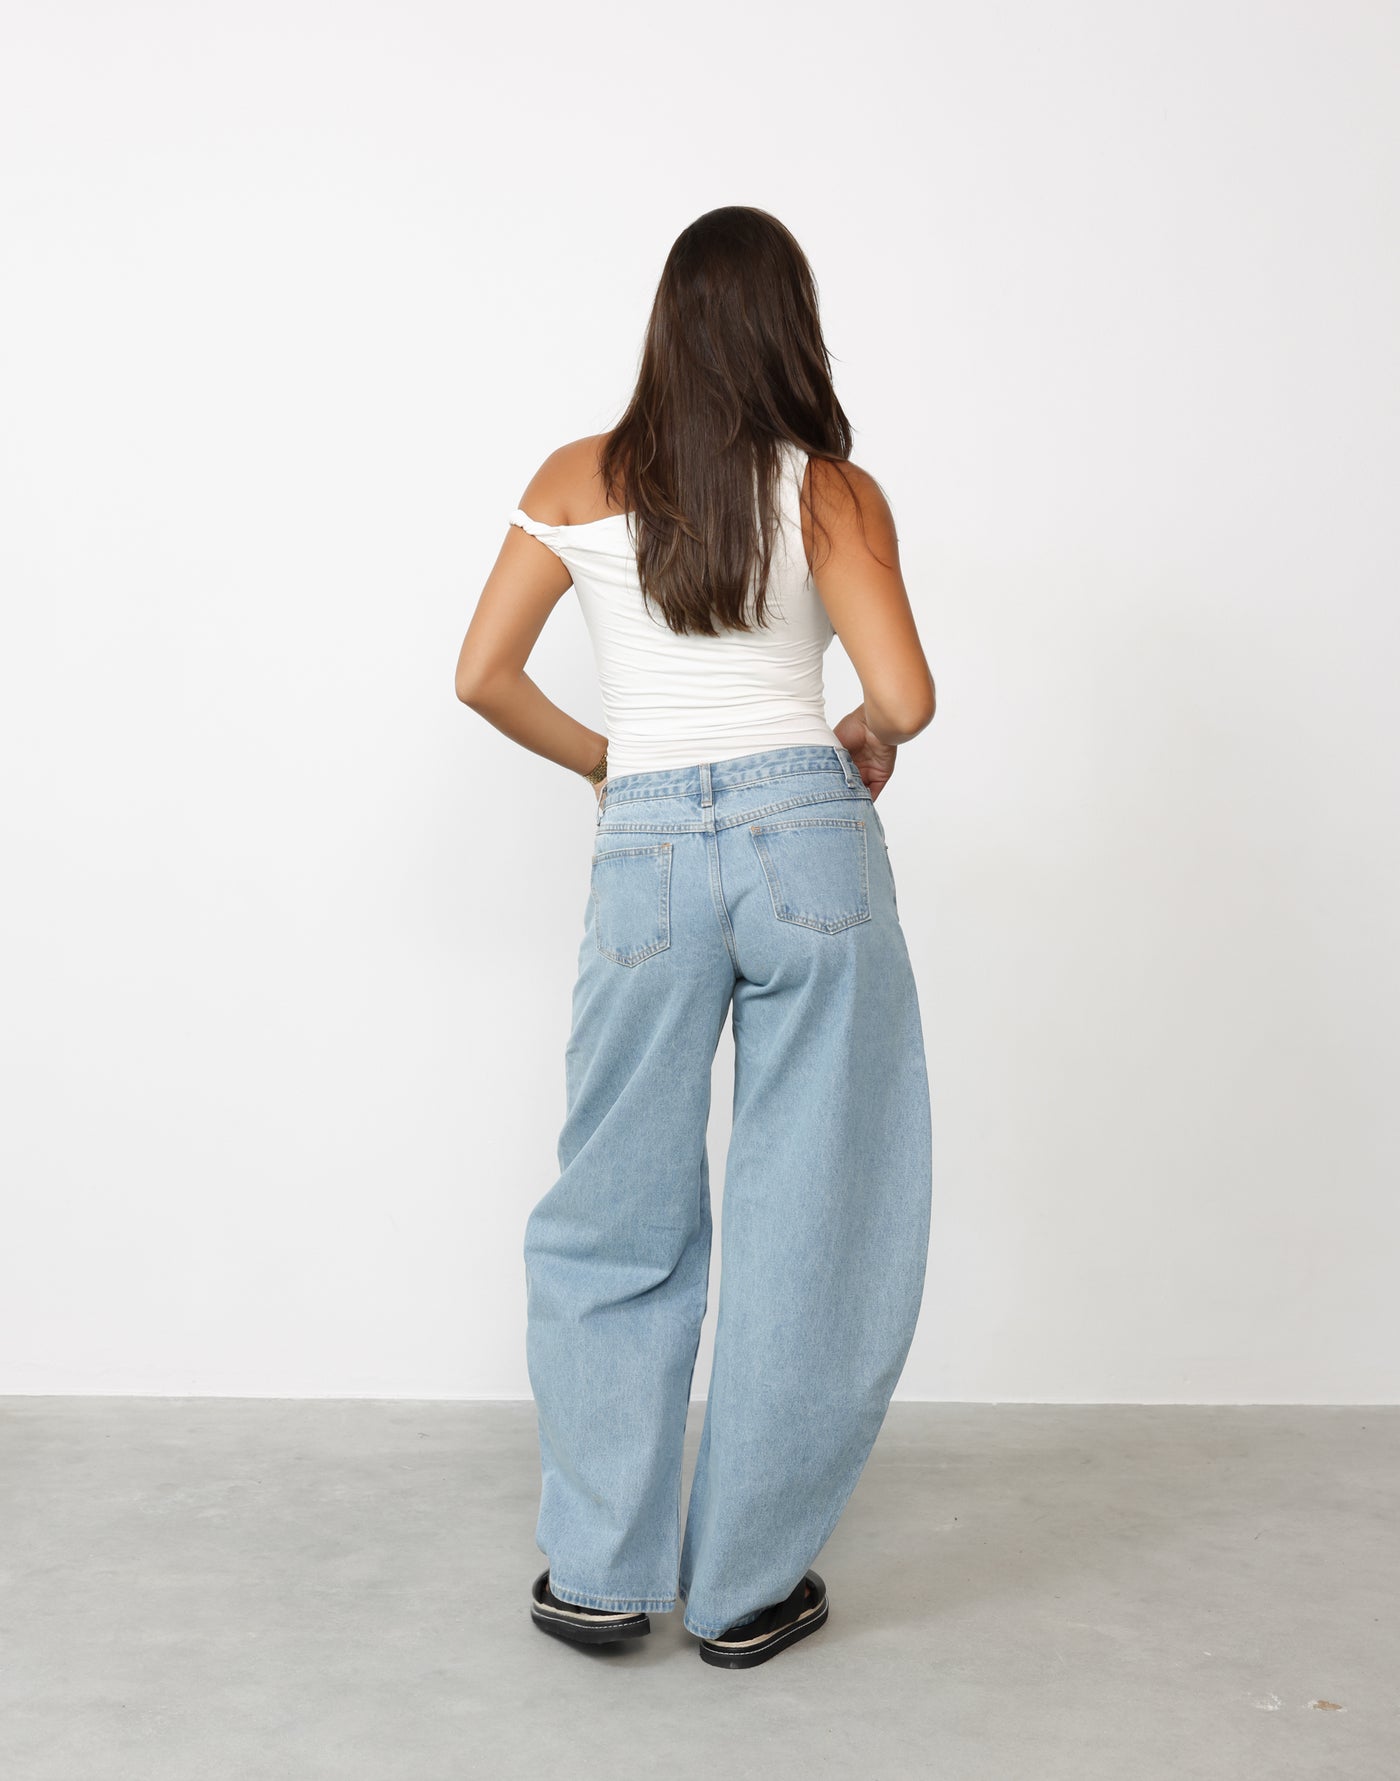 Horseshoe Jean (Washed Blue) - By Lioness - Barrel Style Low Rise Jeans - Women's Pants - Charcoal Clothing